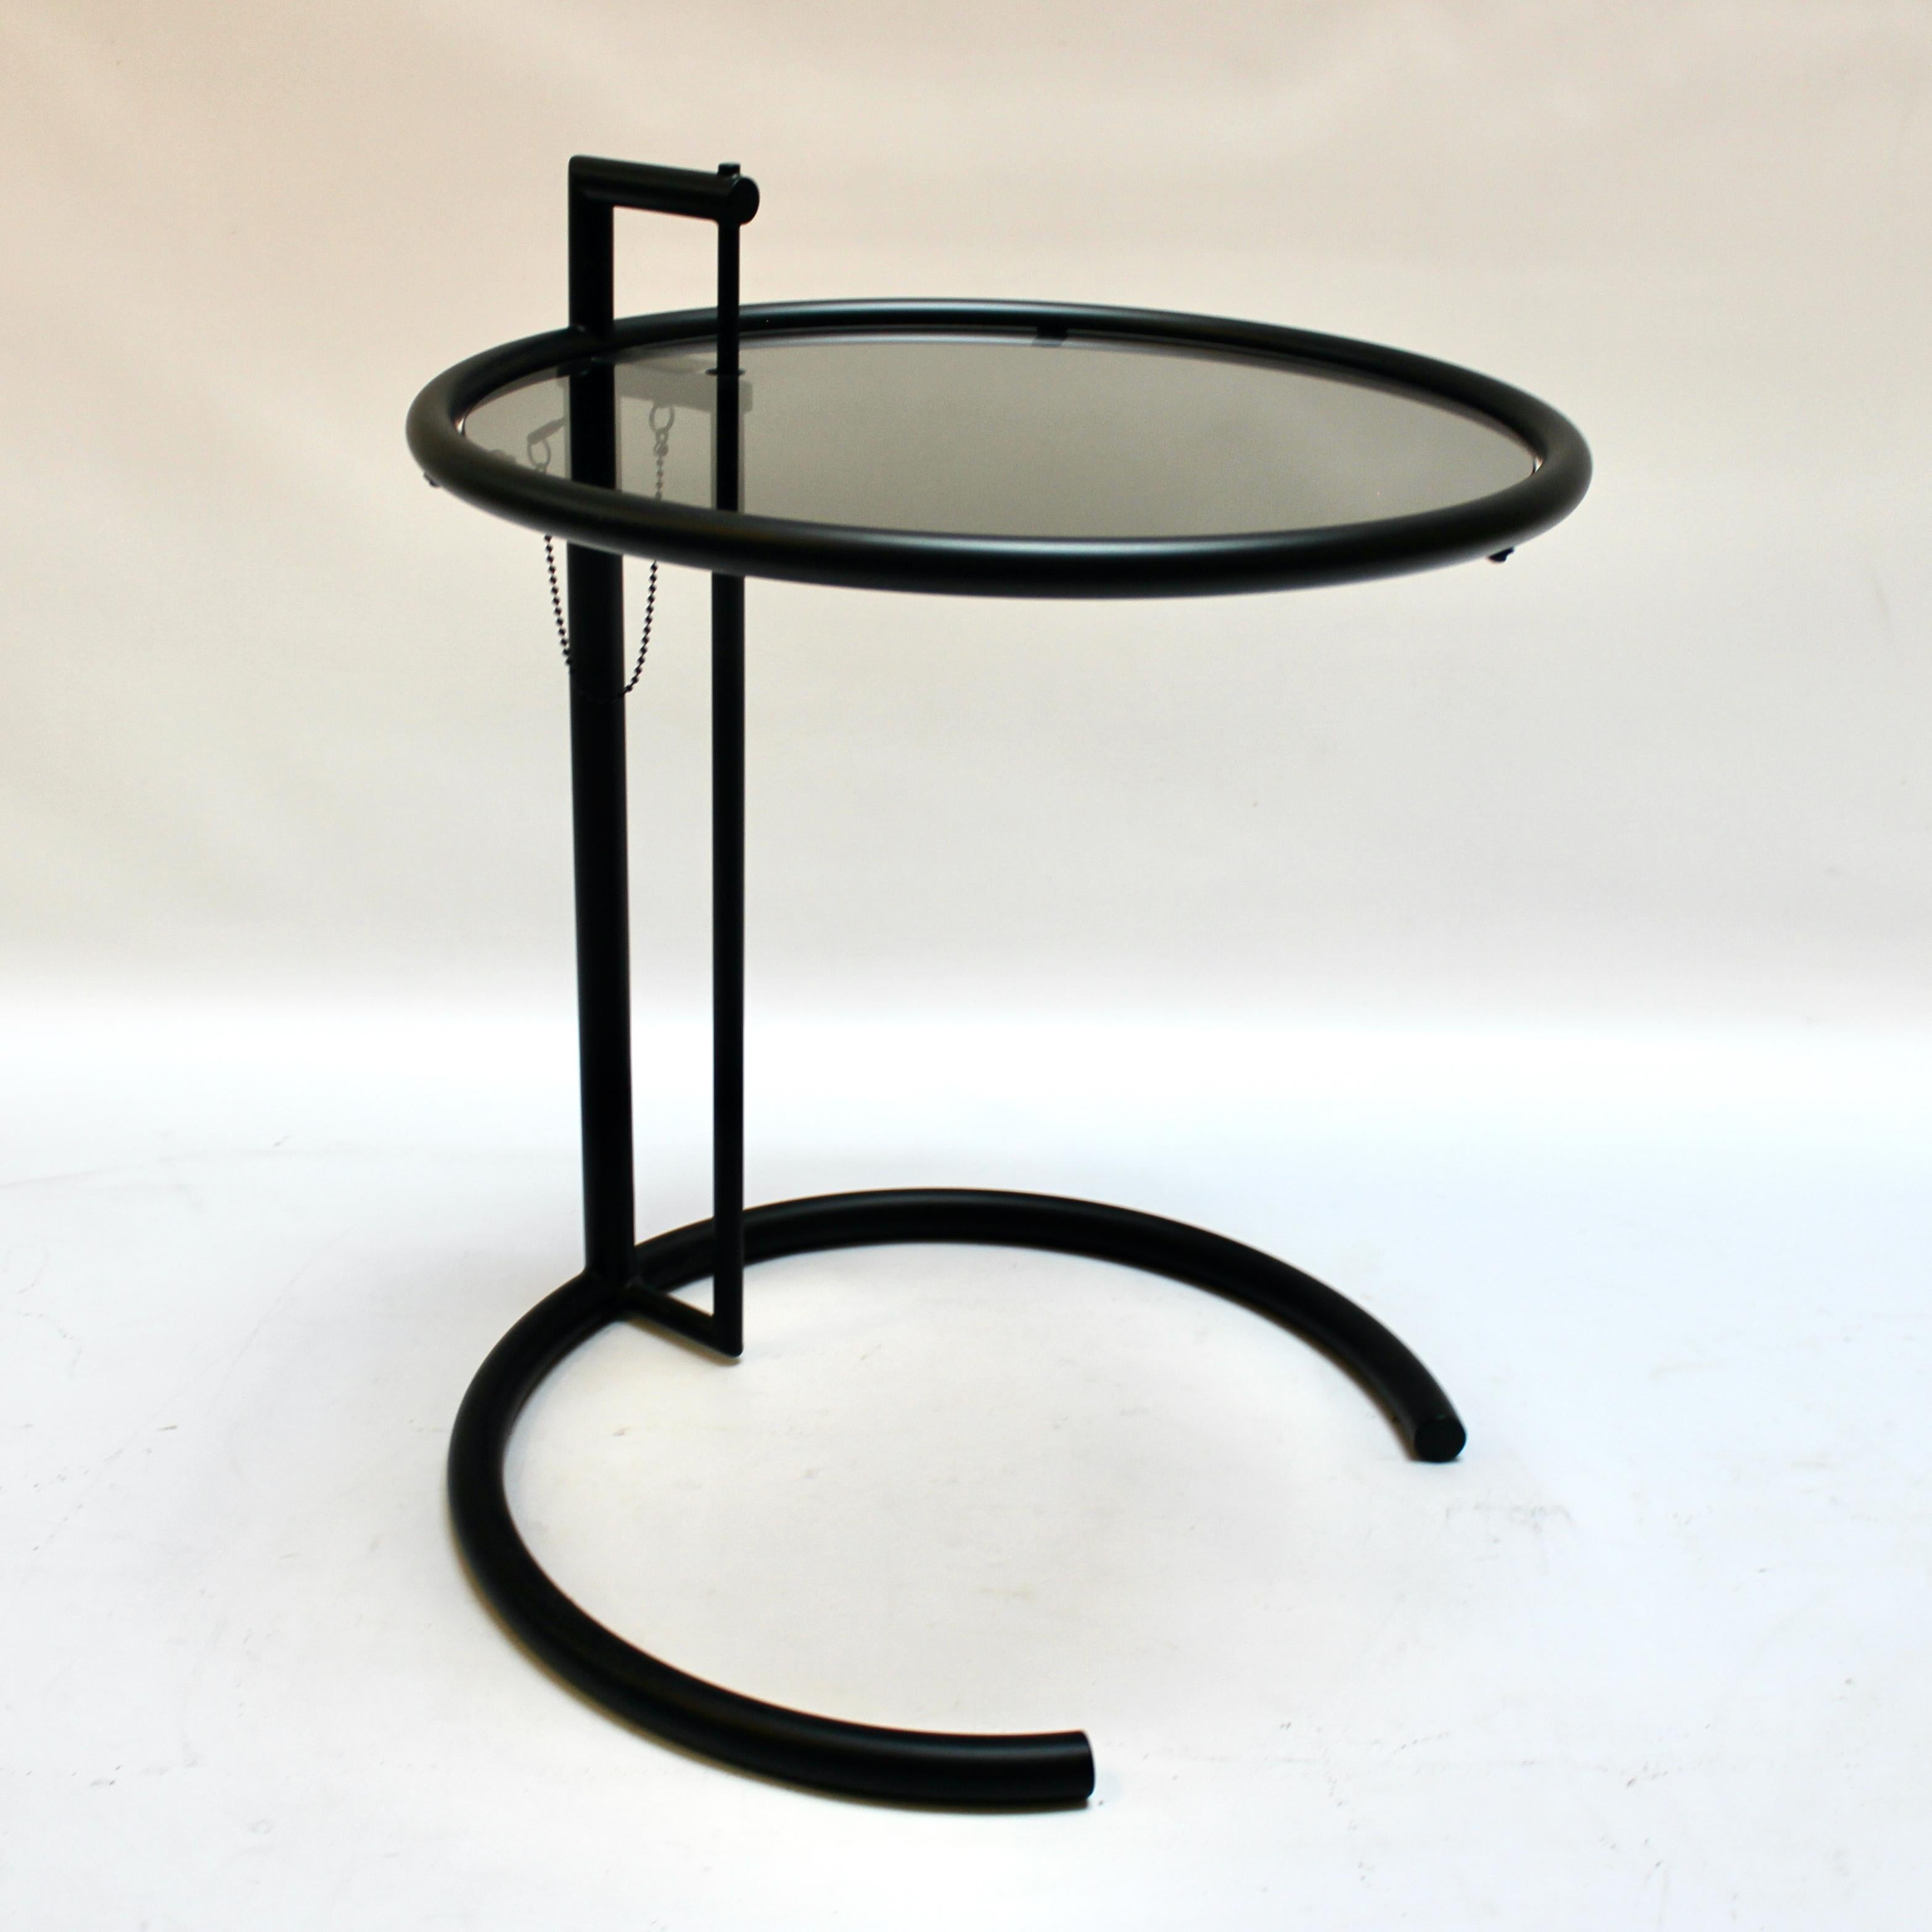 Eileen Gray E1027 Adjustable Side Table by ClassiCon, Made in Italy In Excellent Condition For Sale In Sacramento, CA